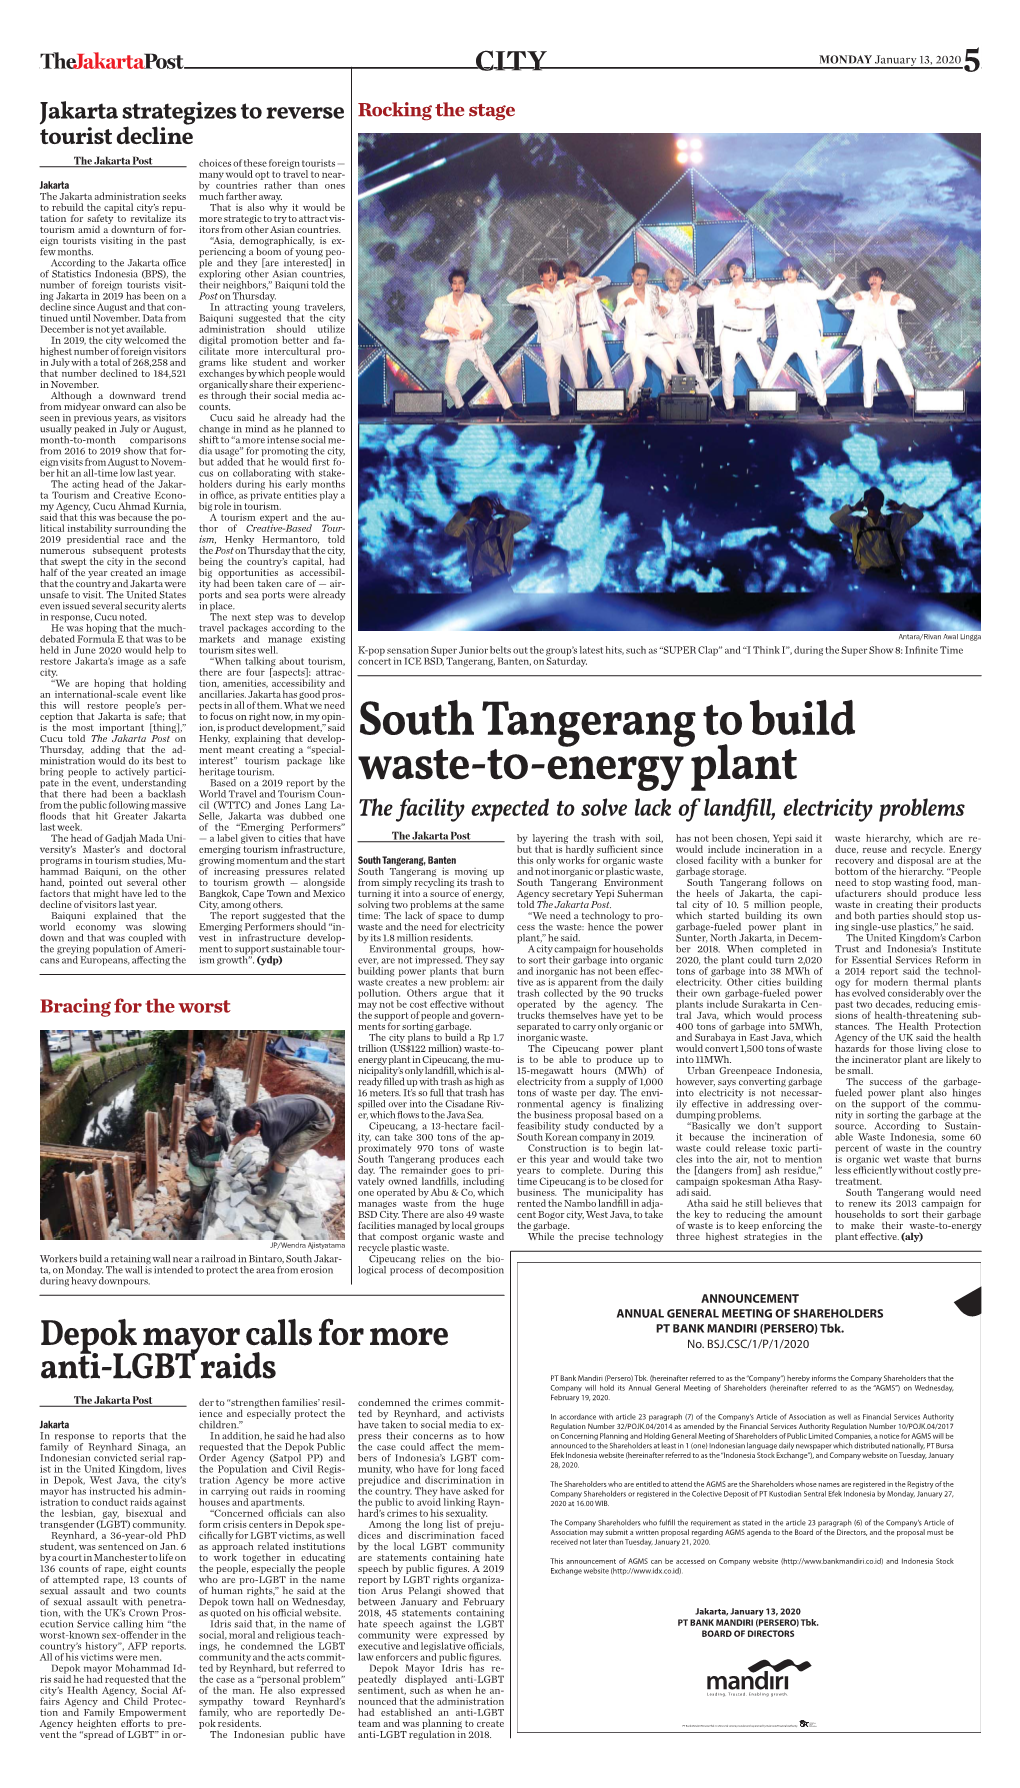 South Tangerang to Build Waste-T0-Energy Plant